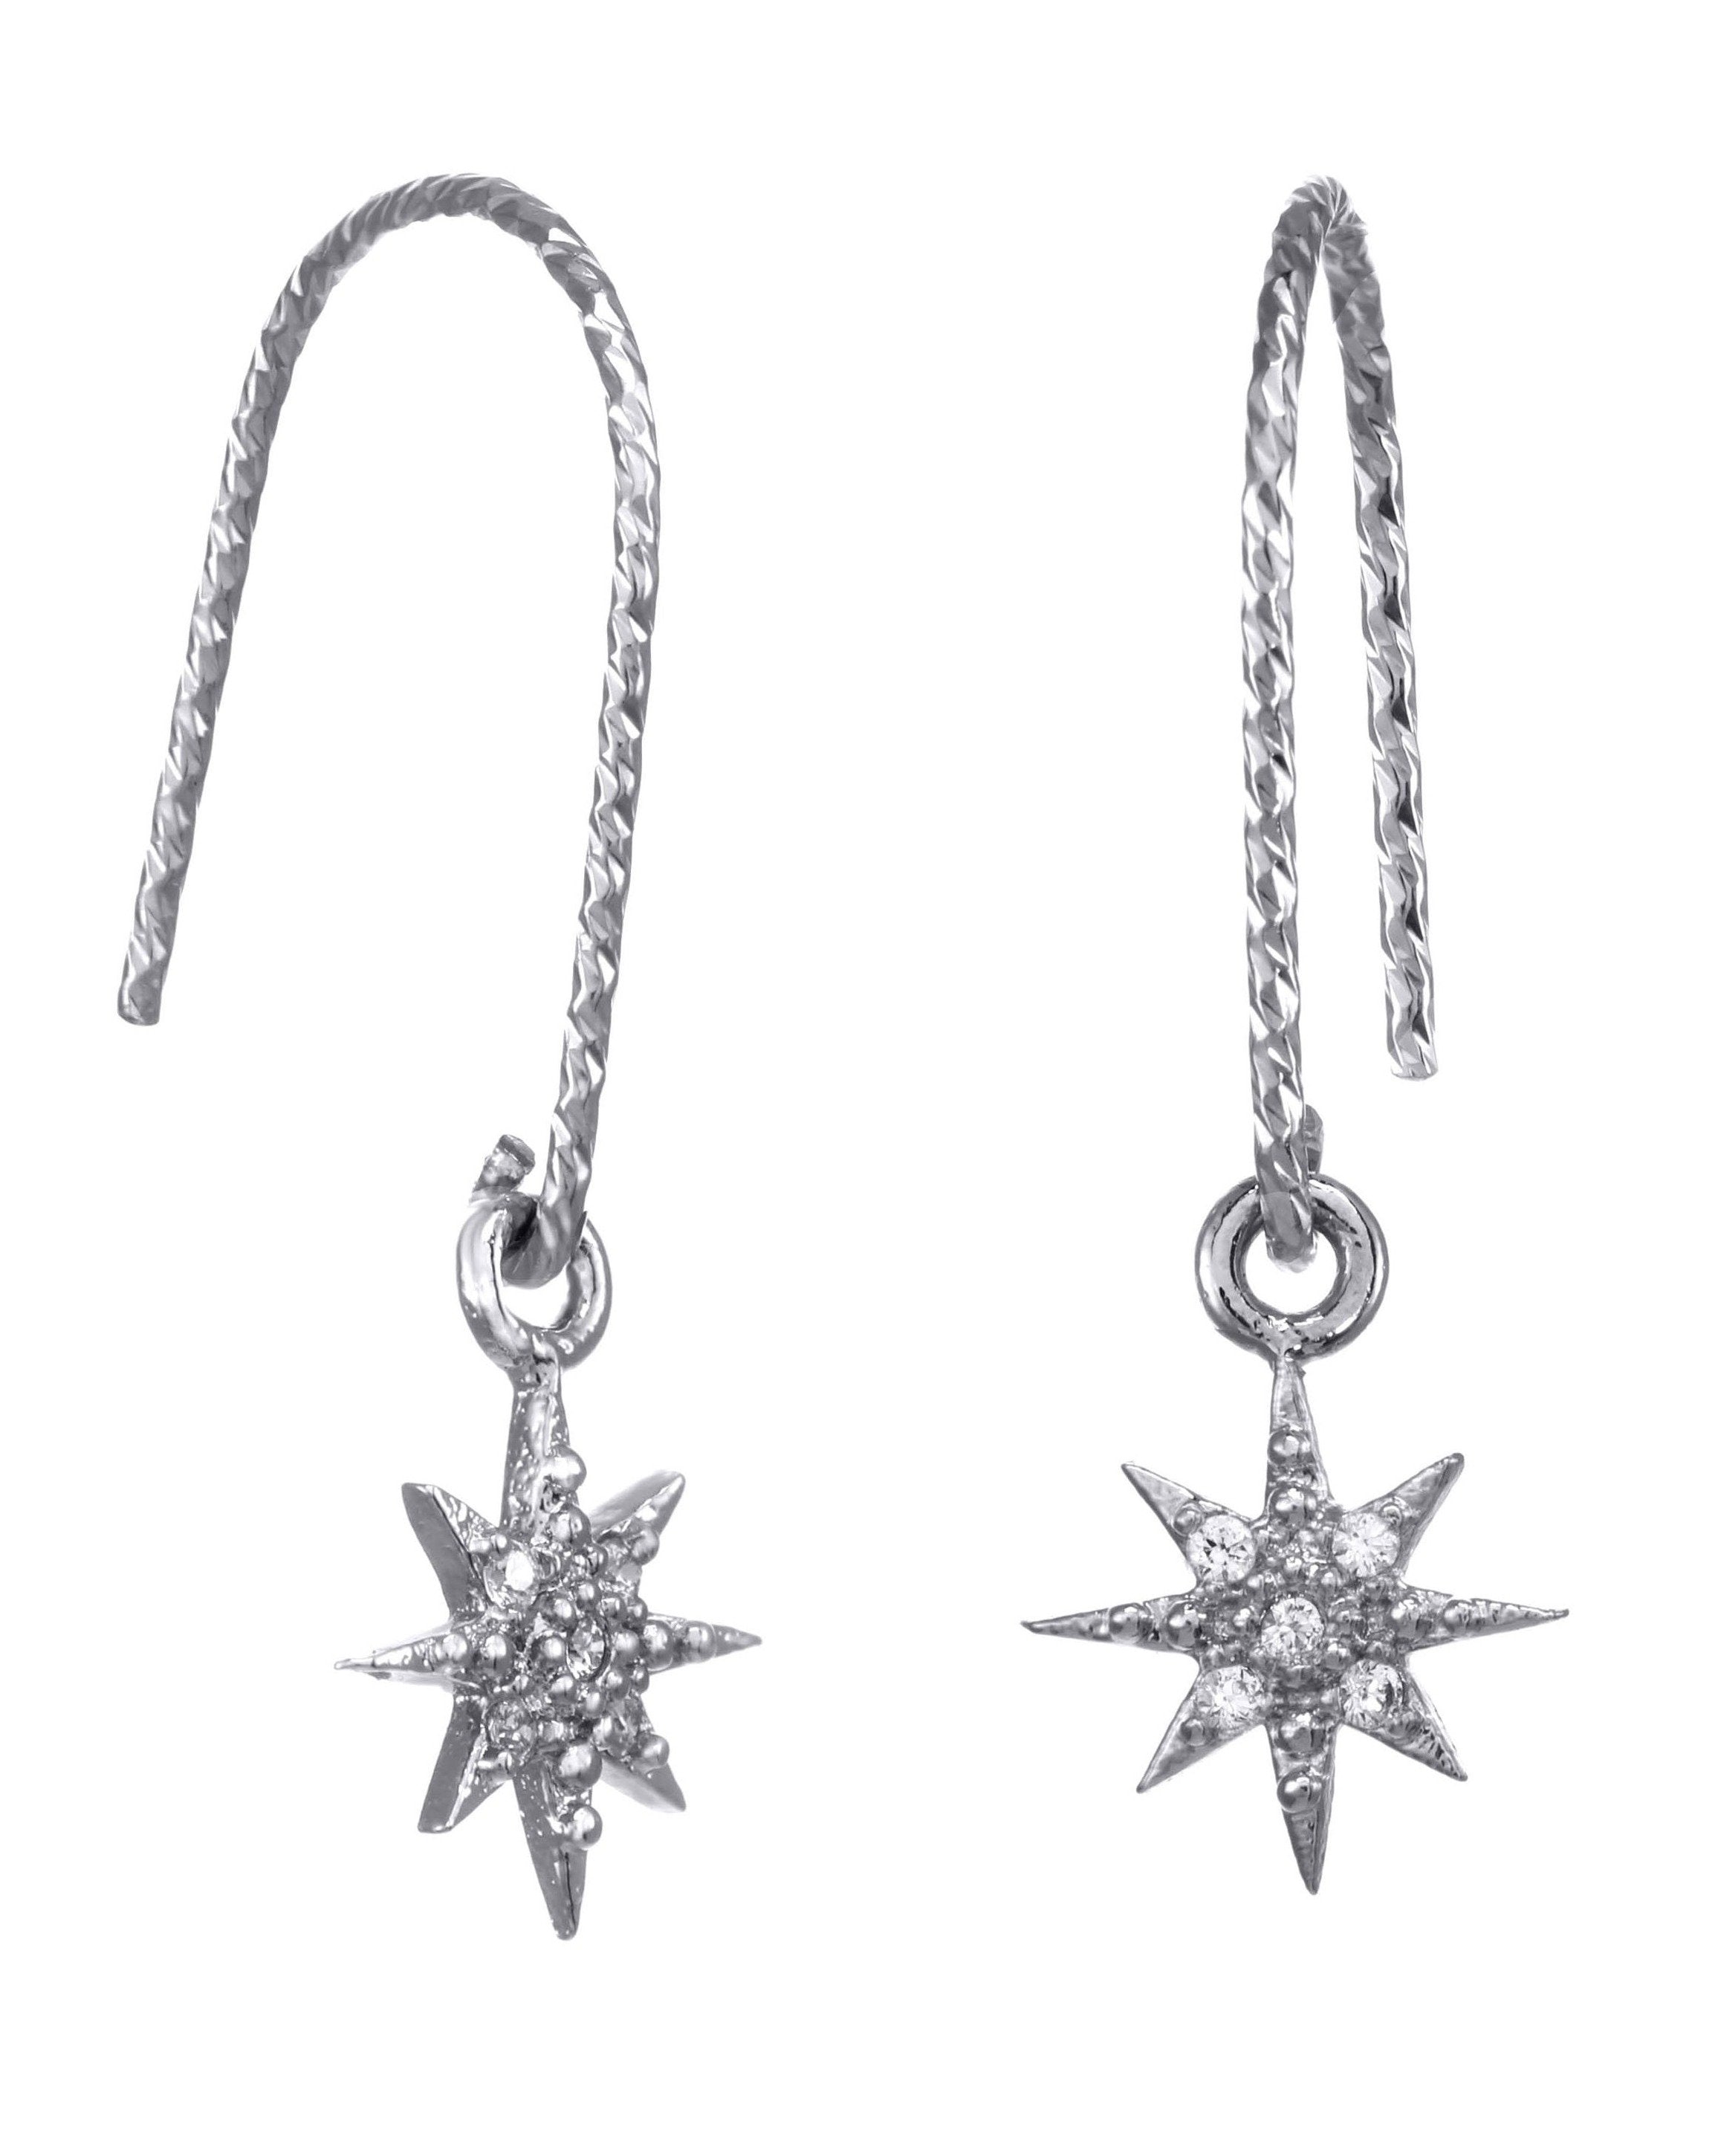 You Star Earrings by KOZAKH. Diamond textured hook earrings, crafted in Sterling Silver, featuring a Cubic Zirconia encrusted 8 point star charm.